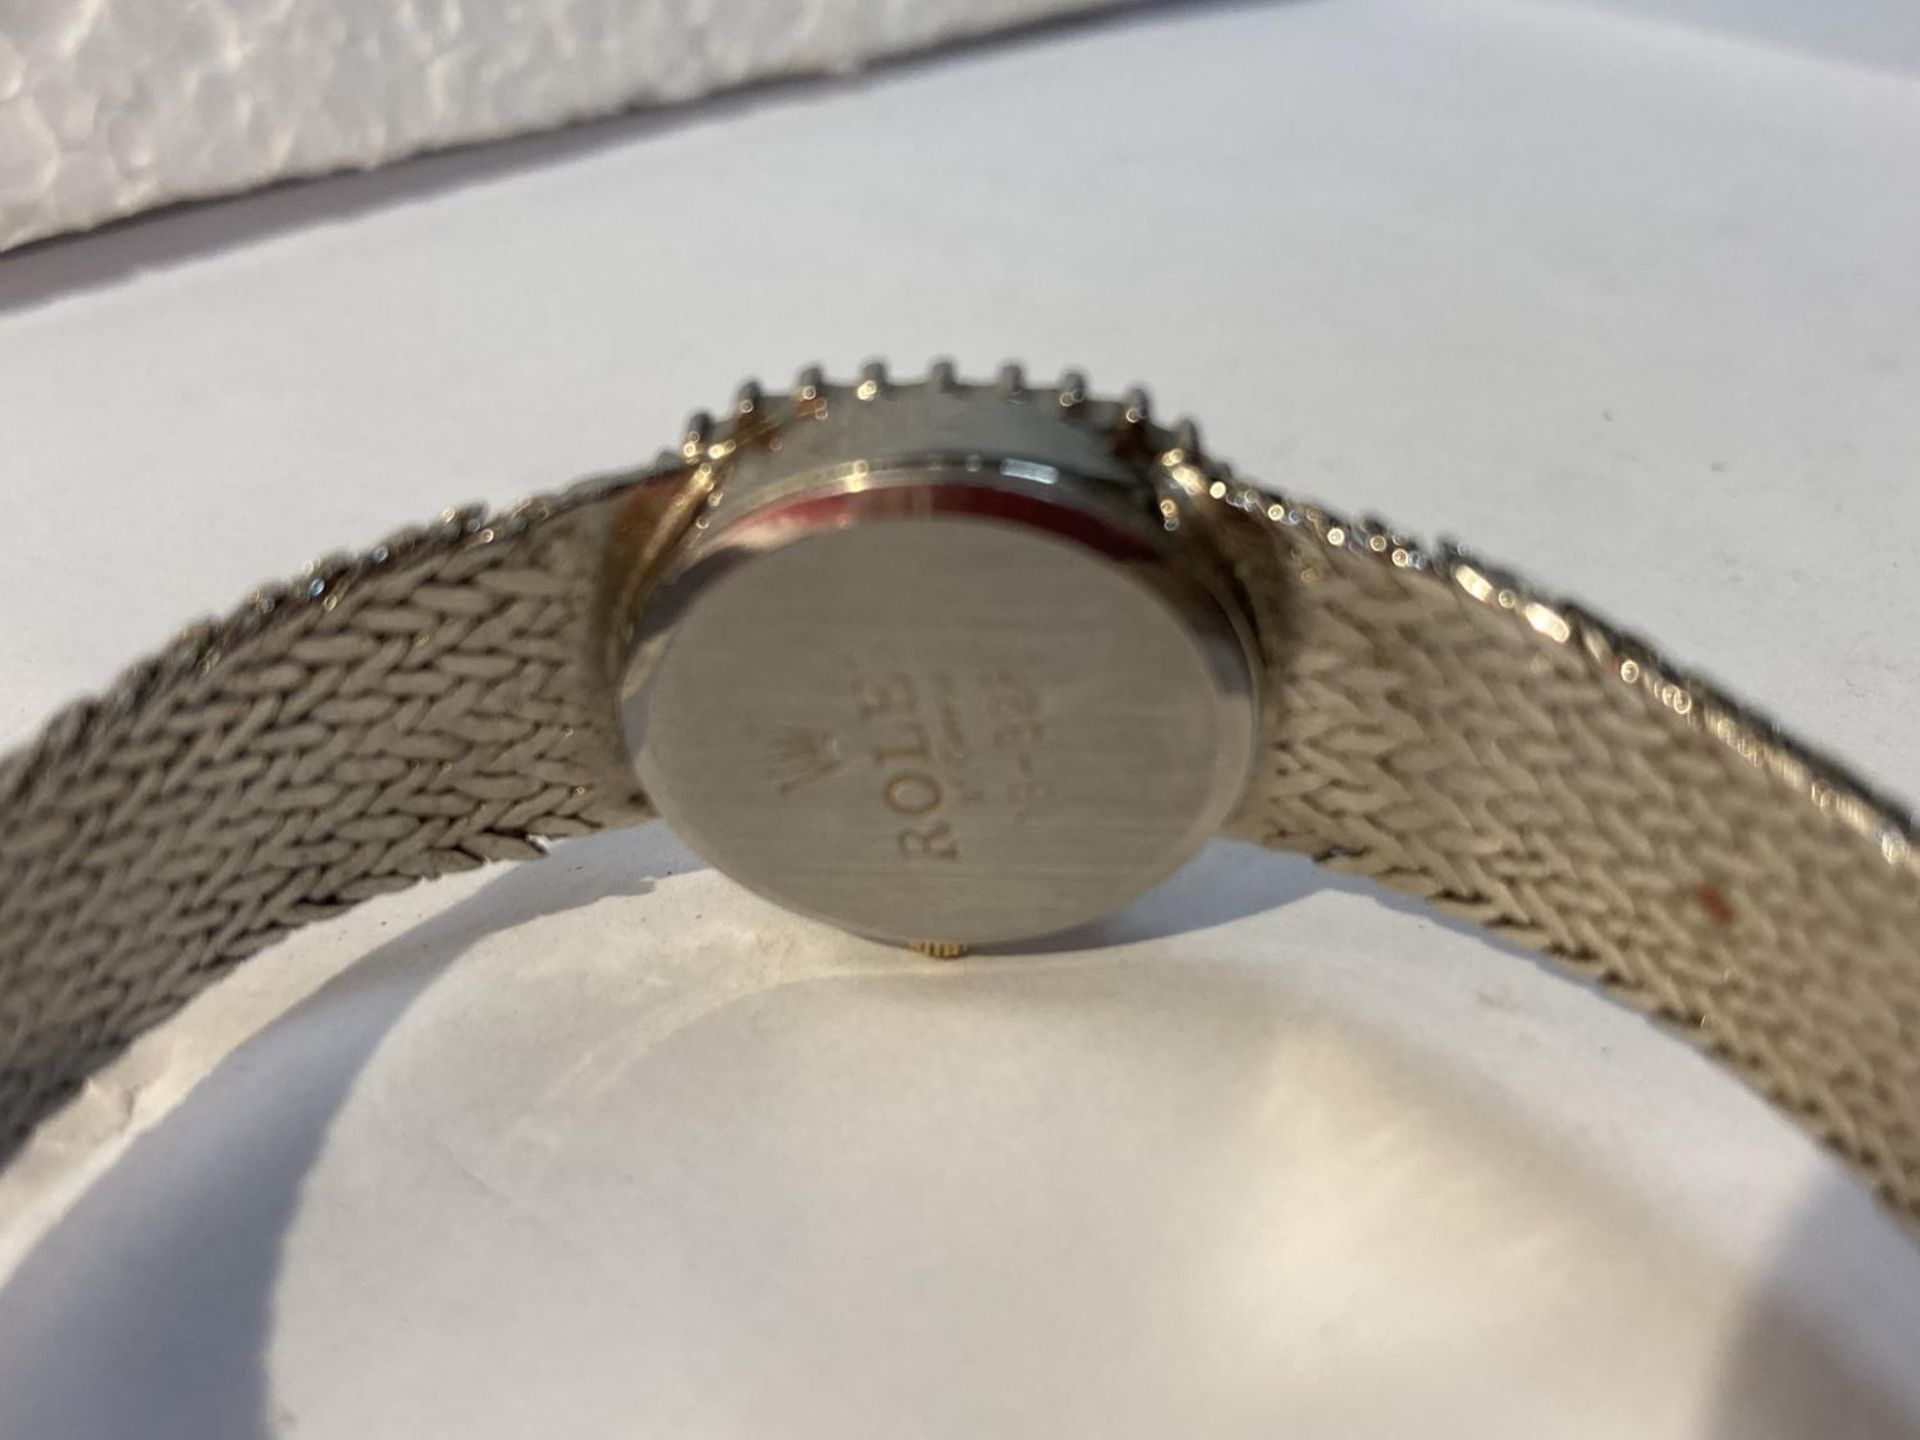 A LADIES FASHION WRIST WATCH SEEN WORKING BUT NO WARRANTY GIVEN - Image 3 of 7